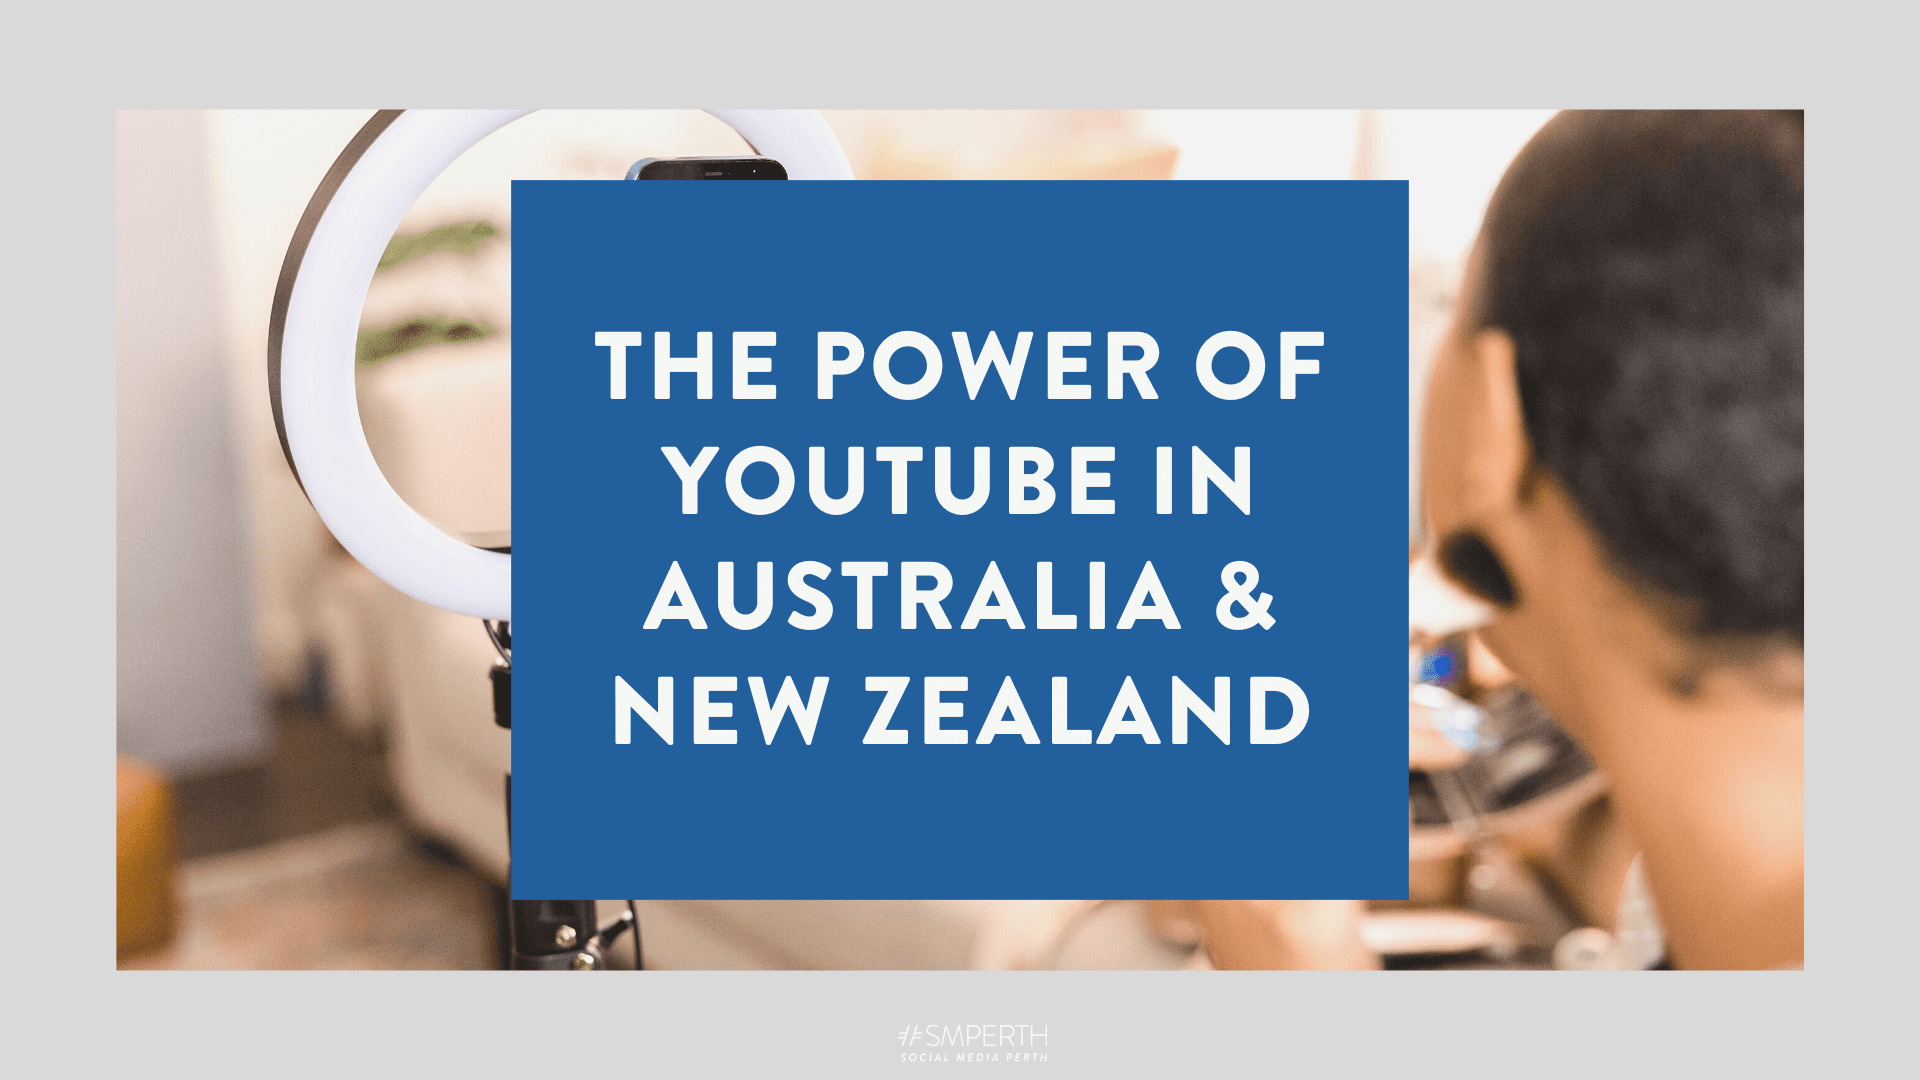 The Power and Potential of YouTube in Australia and New Zealand